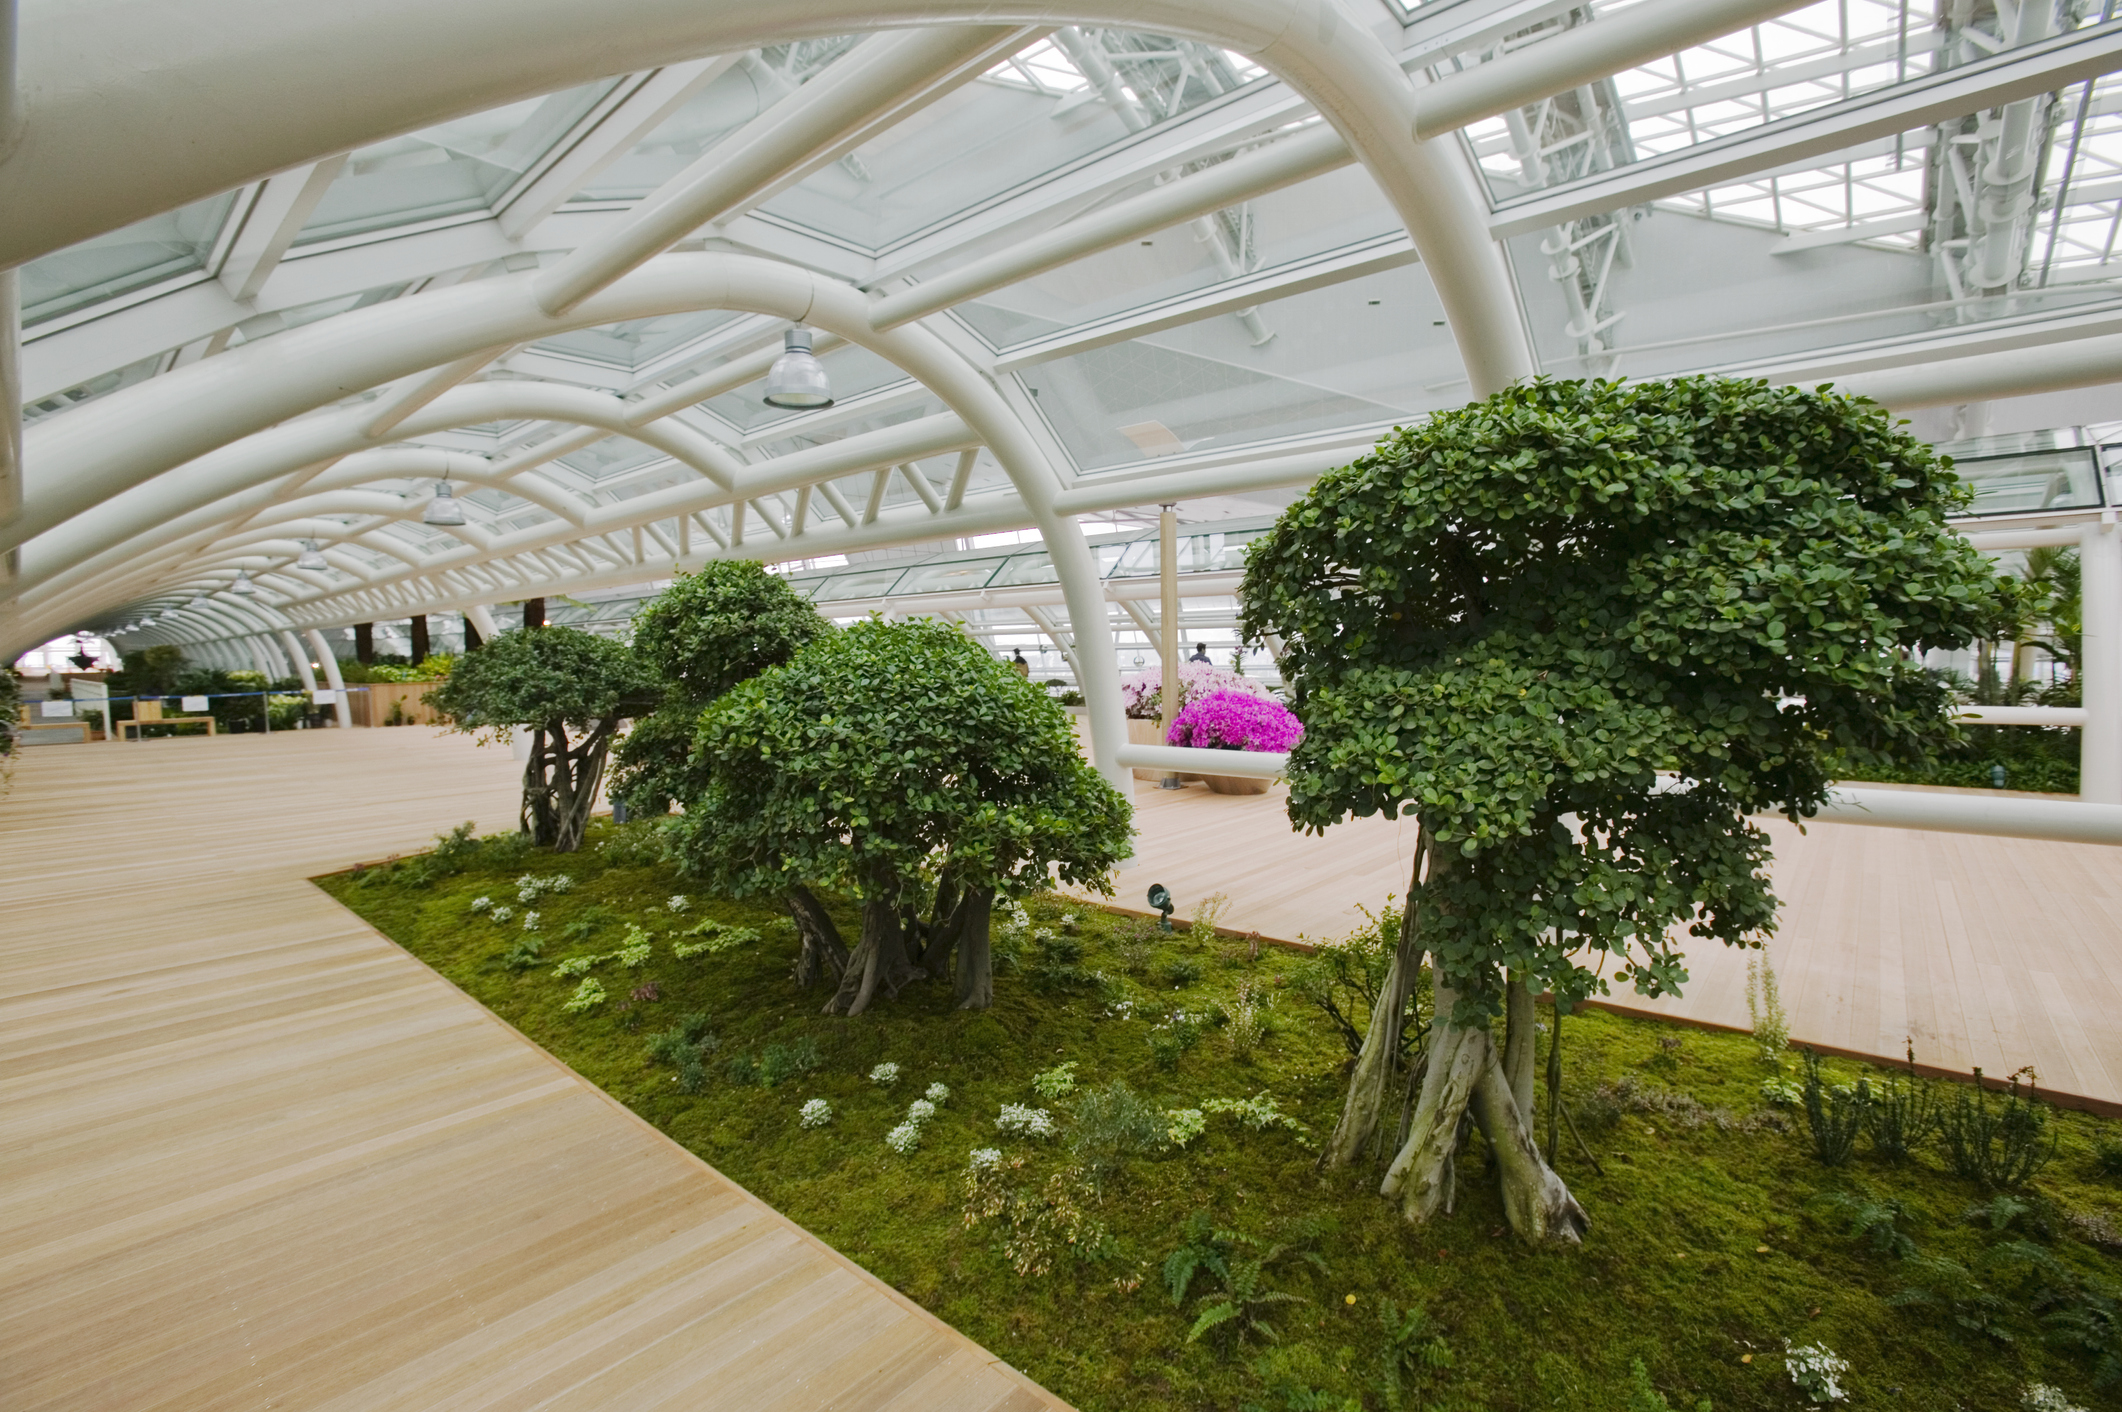 Indoor Garden at the Incheon International Airport. (Ashley Cooper—Getty Images)